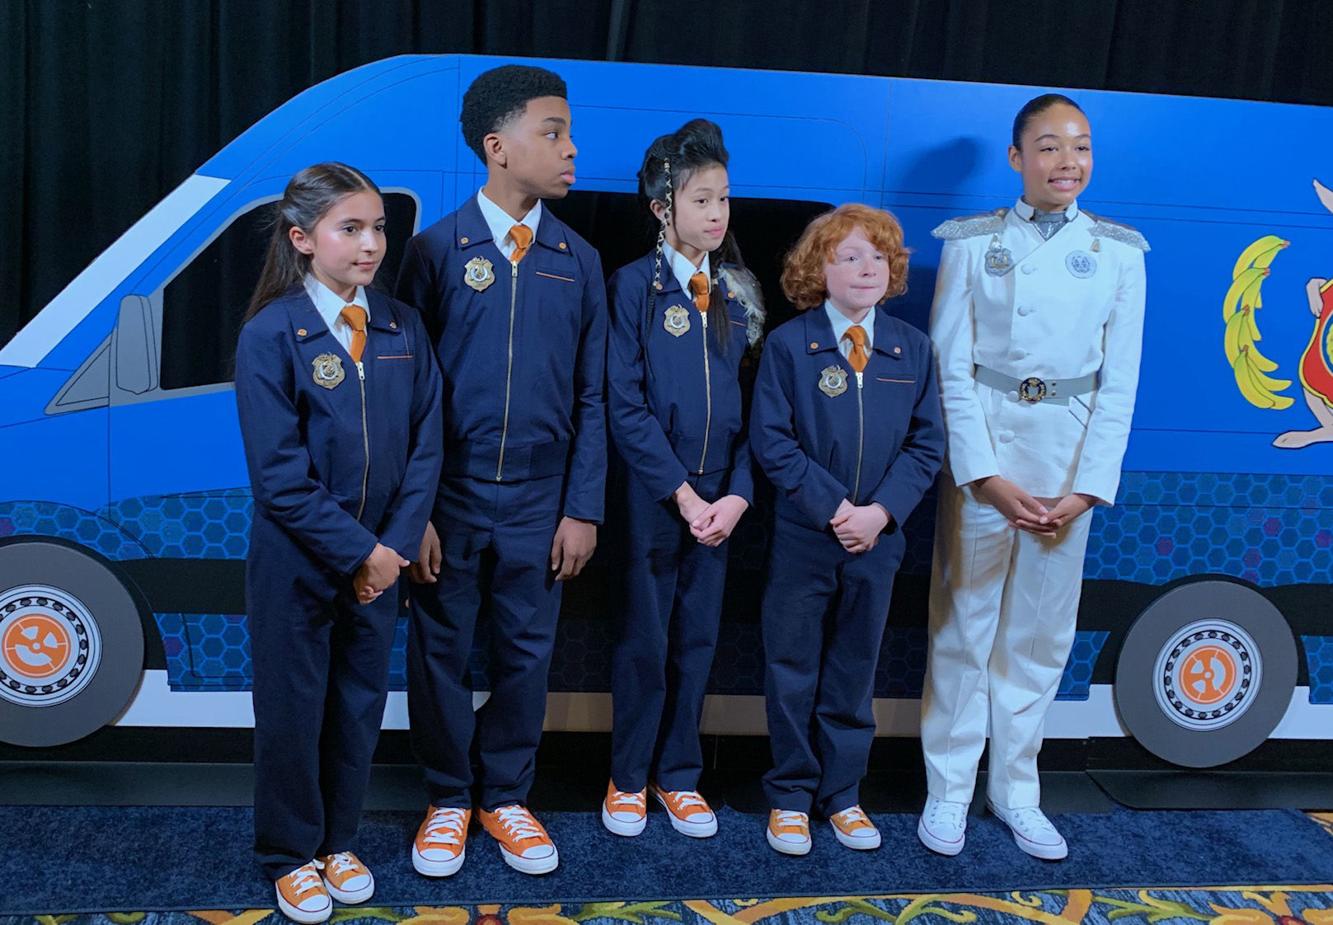 A new 'Odd Squad' is ready for action